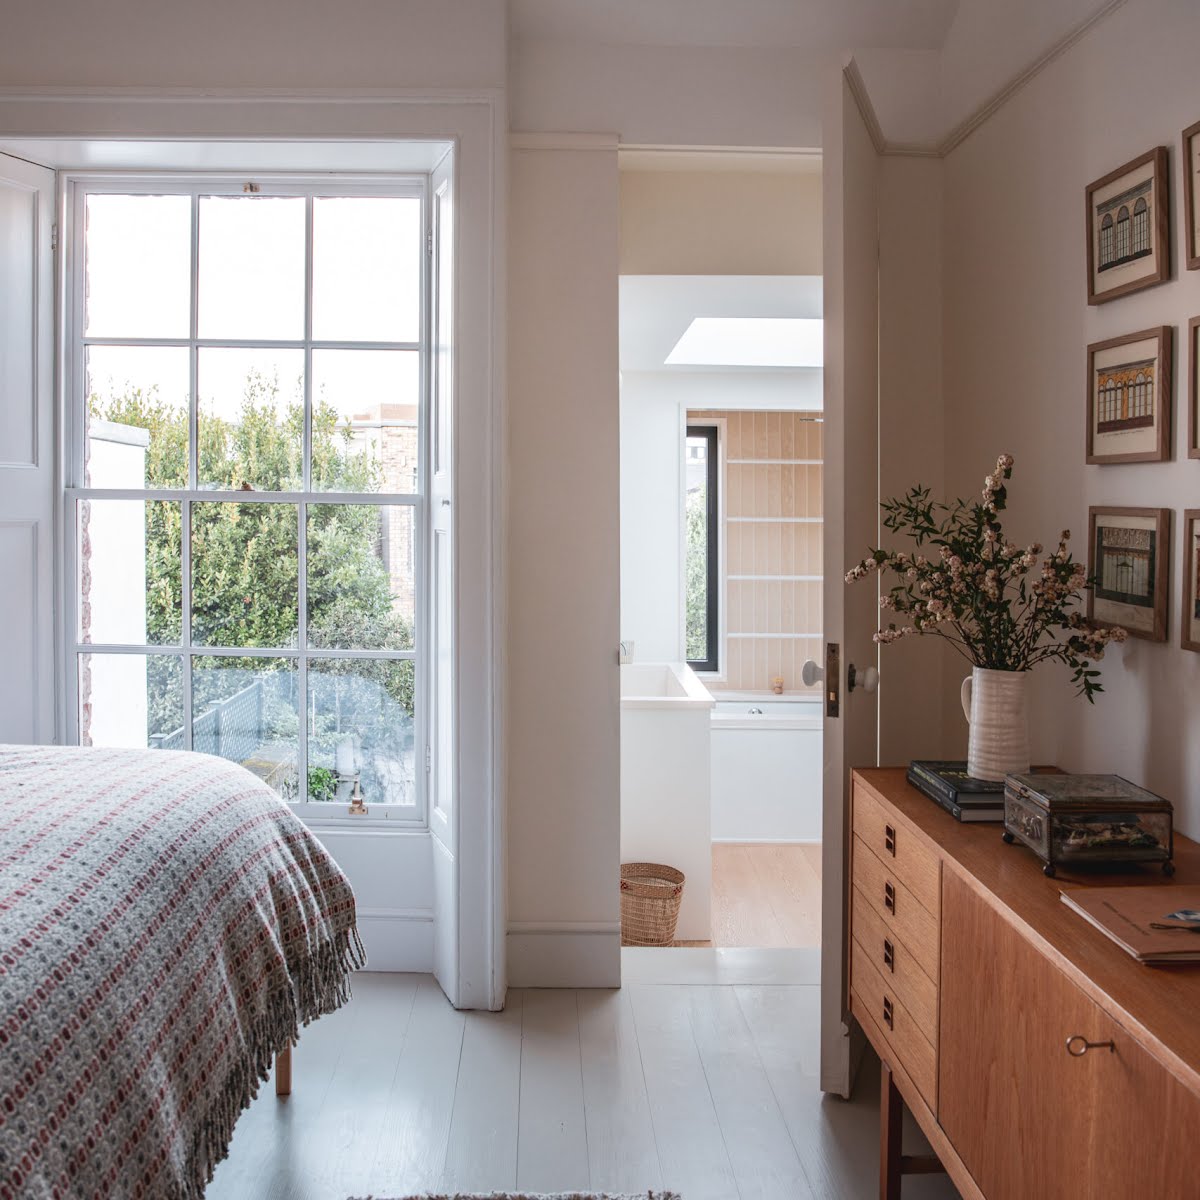 A serene space in this Dublin home, photographed by Ruth Maria Murphy